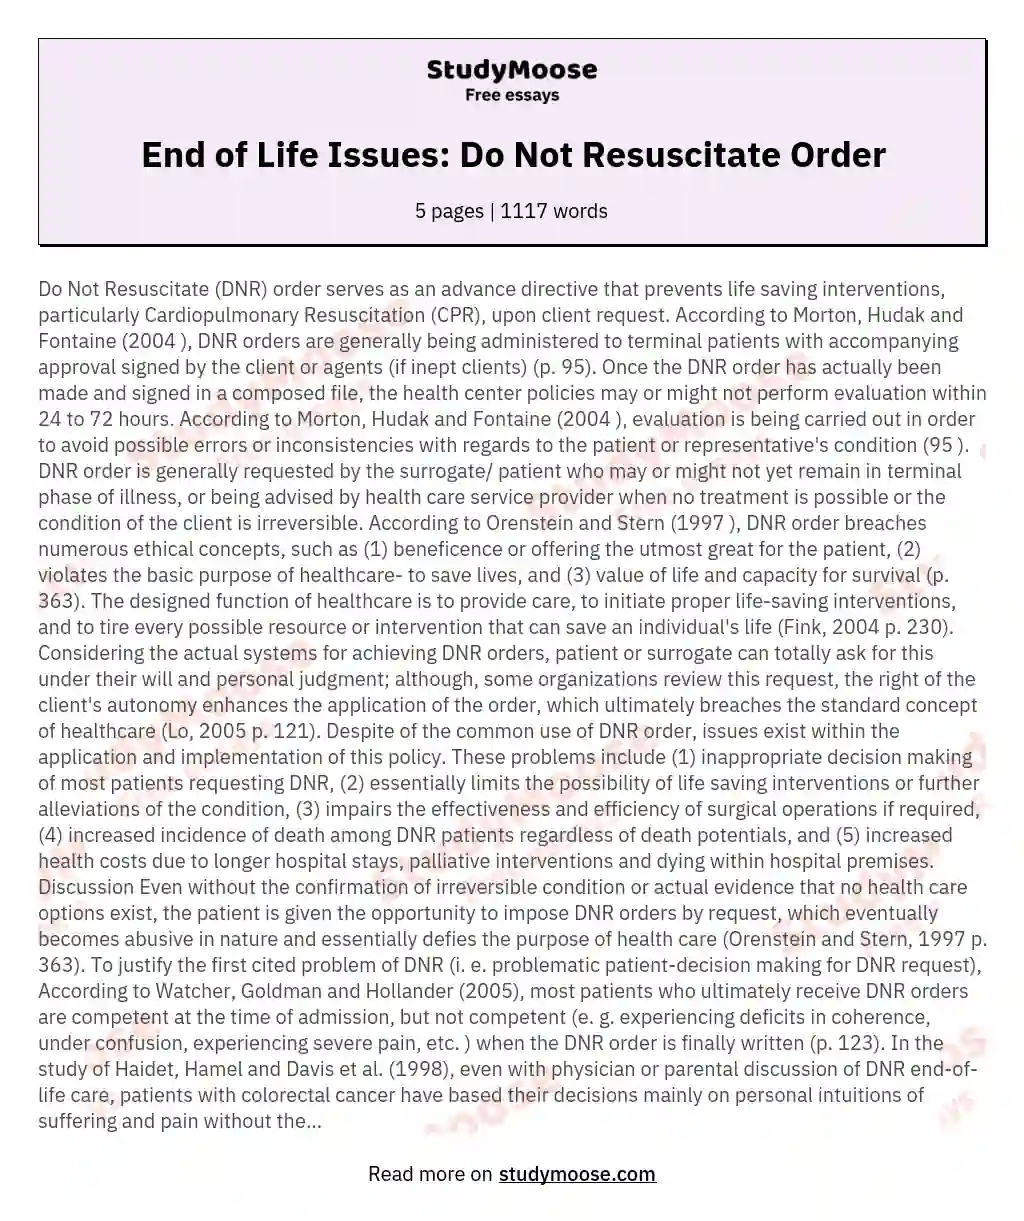 End of Life Issues: Do Not Resuscitate Order essay